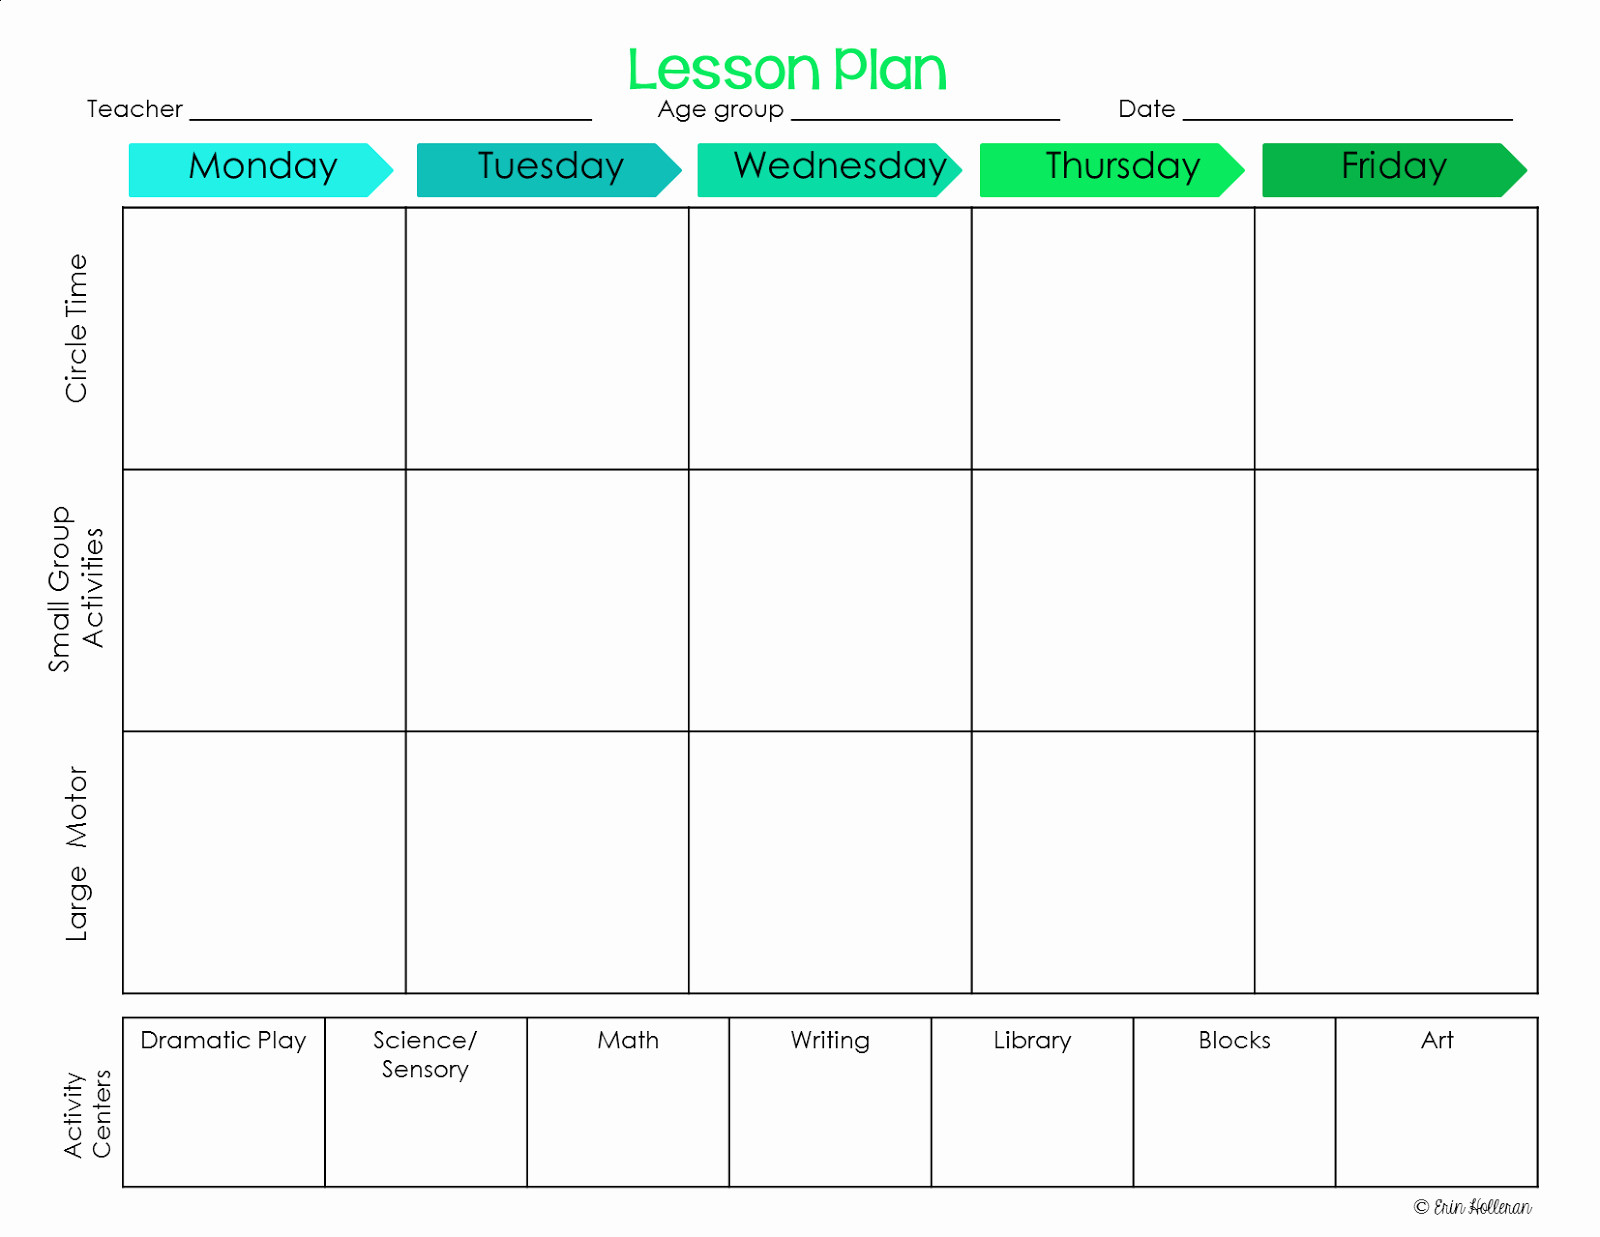 Weekly Lesson Plan for toddlers 005 Preschool Weekly Lesson Plan Template Free Ideas with